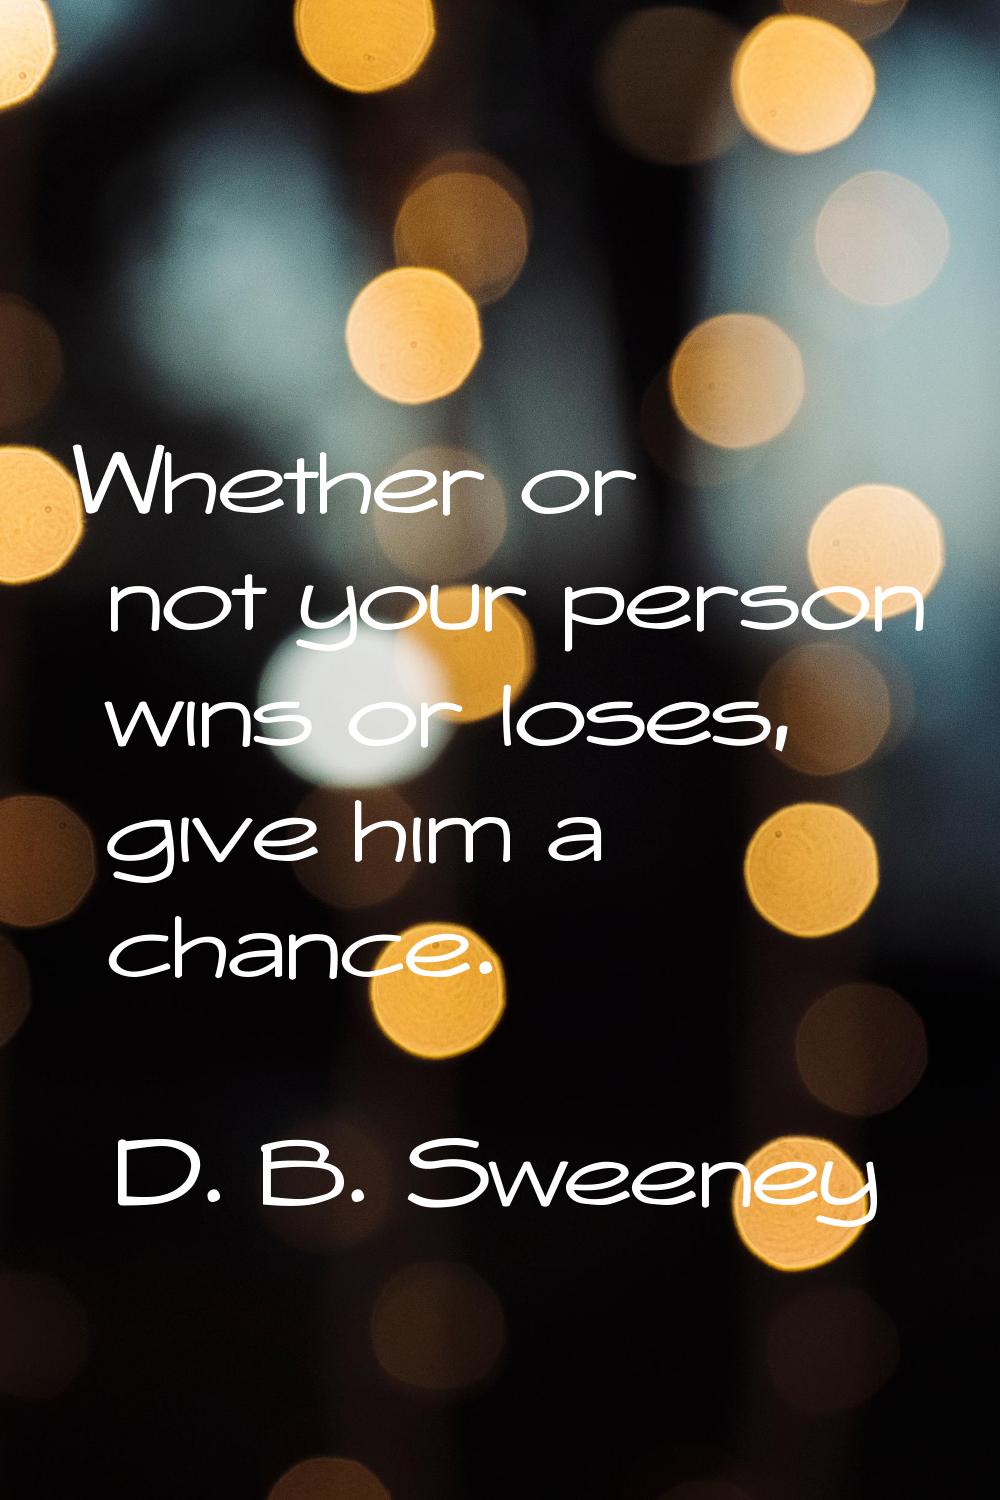 Whether or not your person wins or loses, give him a chance.